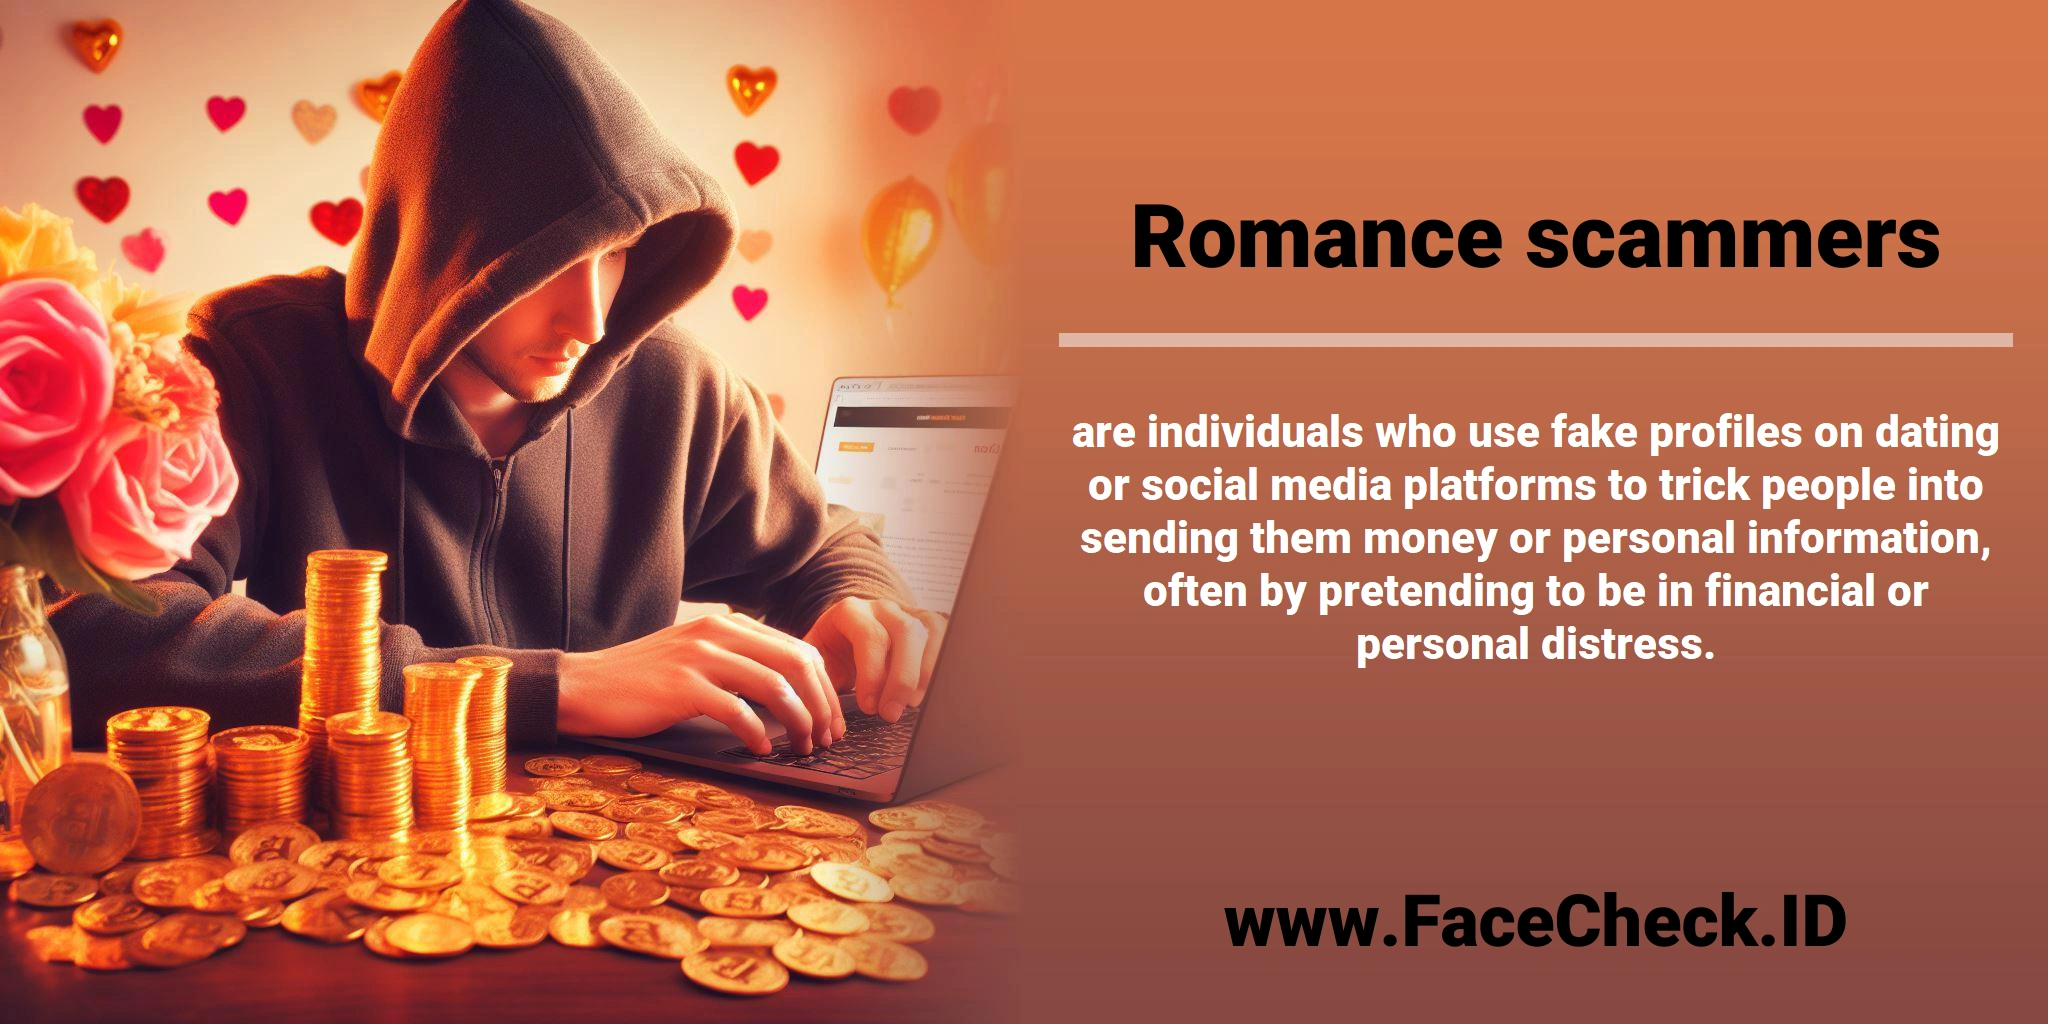 <b>Romance scammers</b> are individuals who use fake profiles on dating or social media platforms to trick people into sending them money or personal information, often by pretending to be in financial or personal distress.